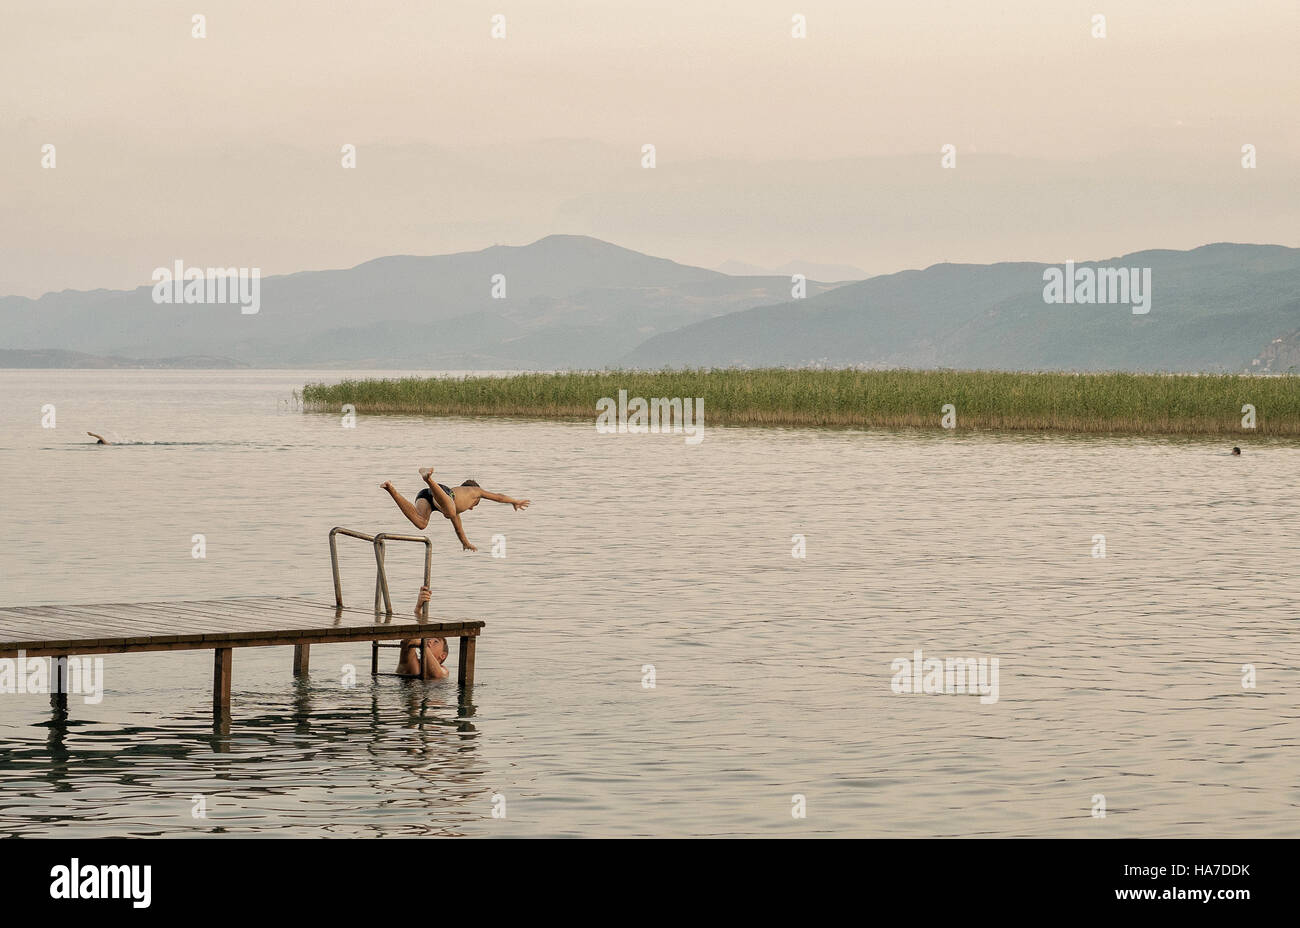 A boy is jumping in the lake, Stock Photo